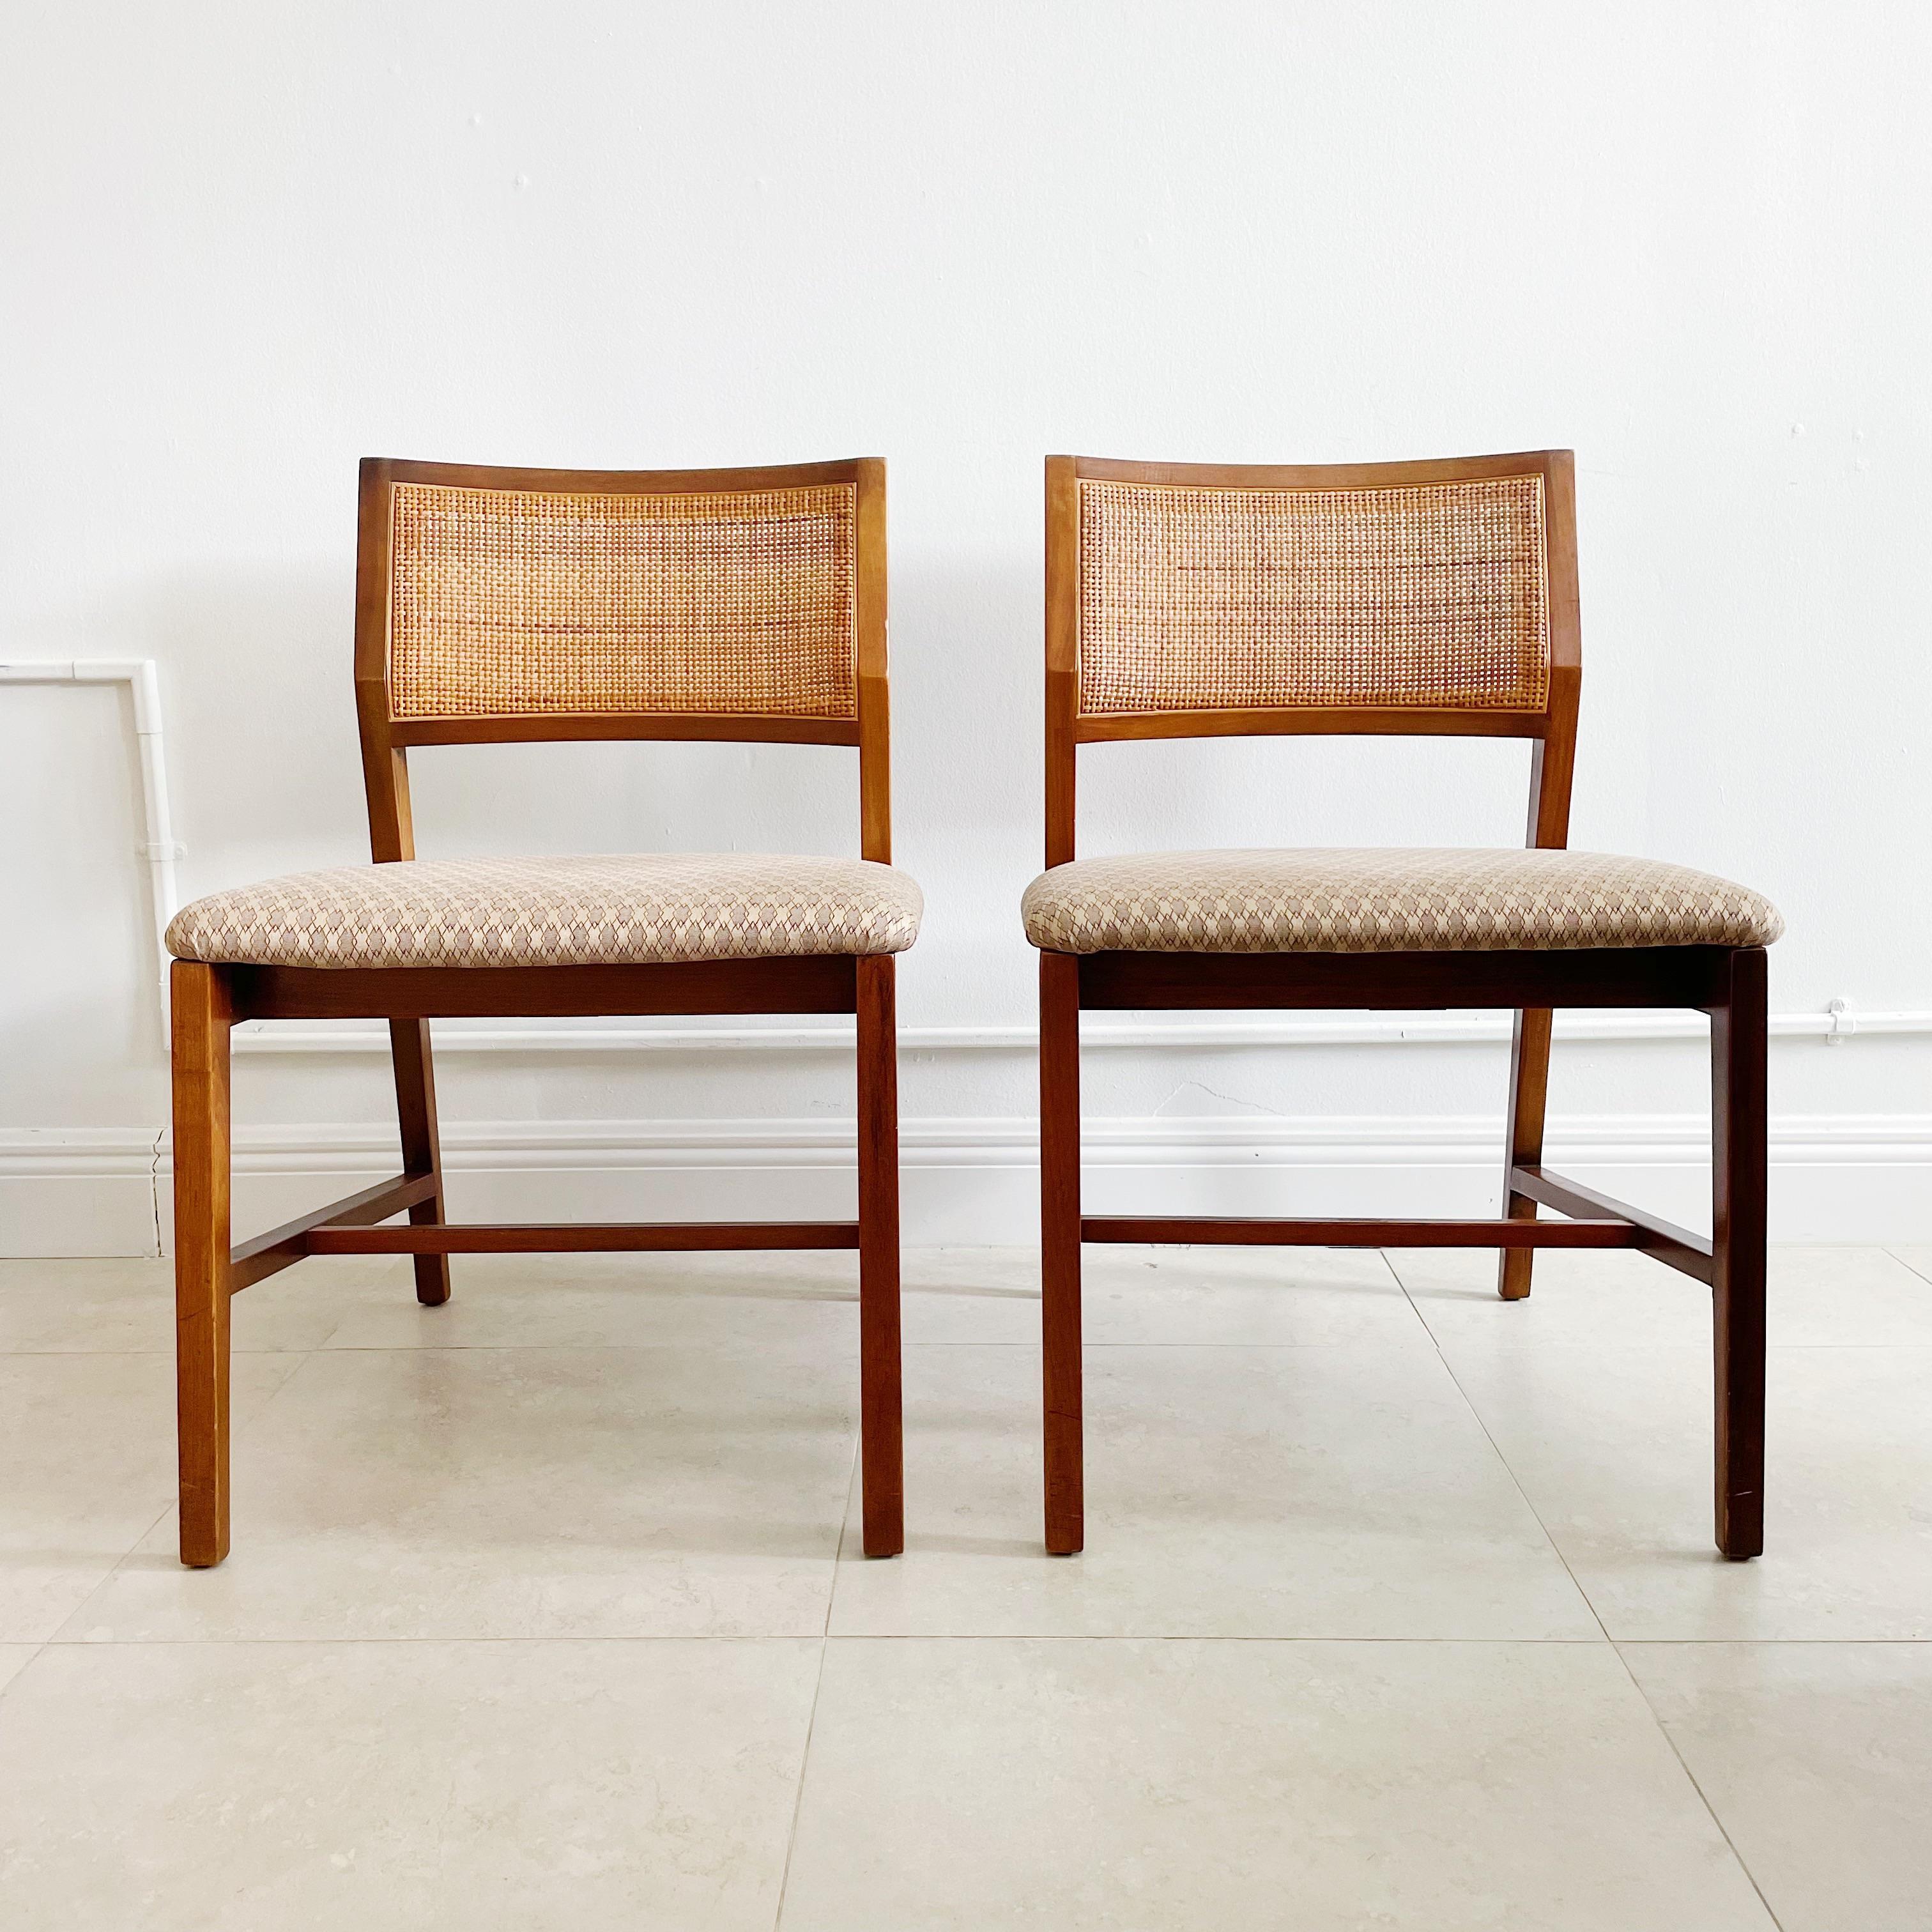 Exceptional pair of 1950's Edward Wormley for Dunbar walnut side chairs or game table chairs. They feature organic Vienna straw backs and original fabric seats. One pair available.